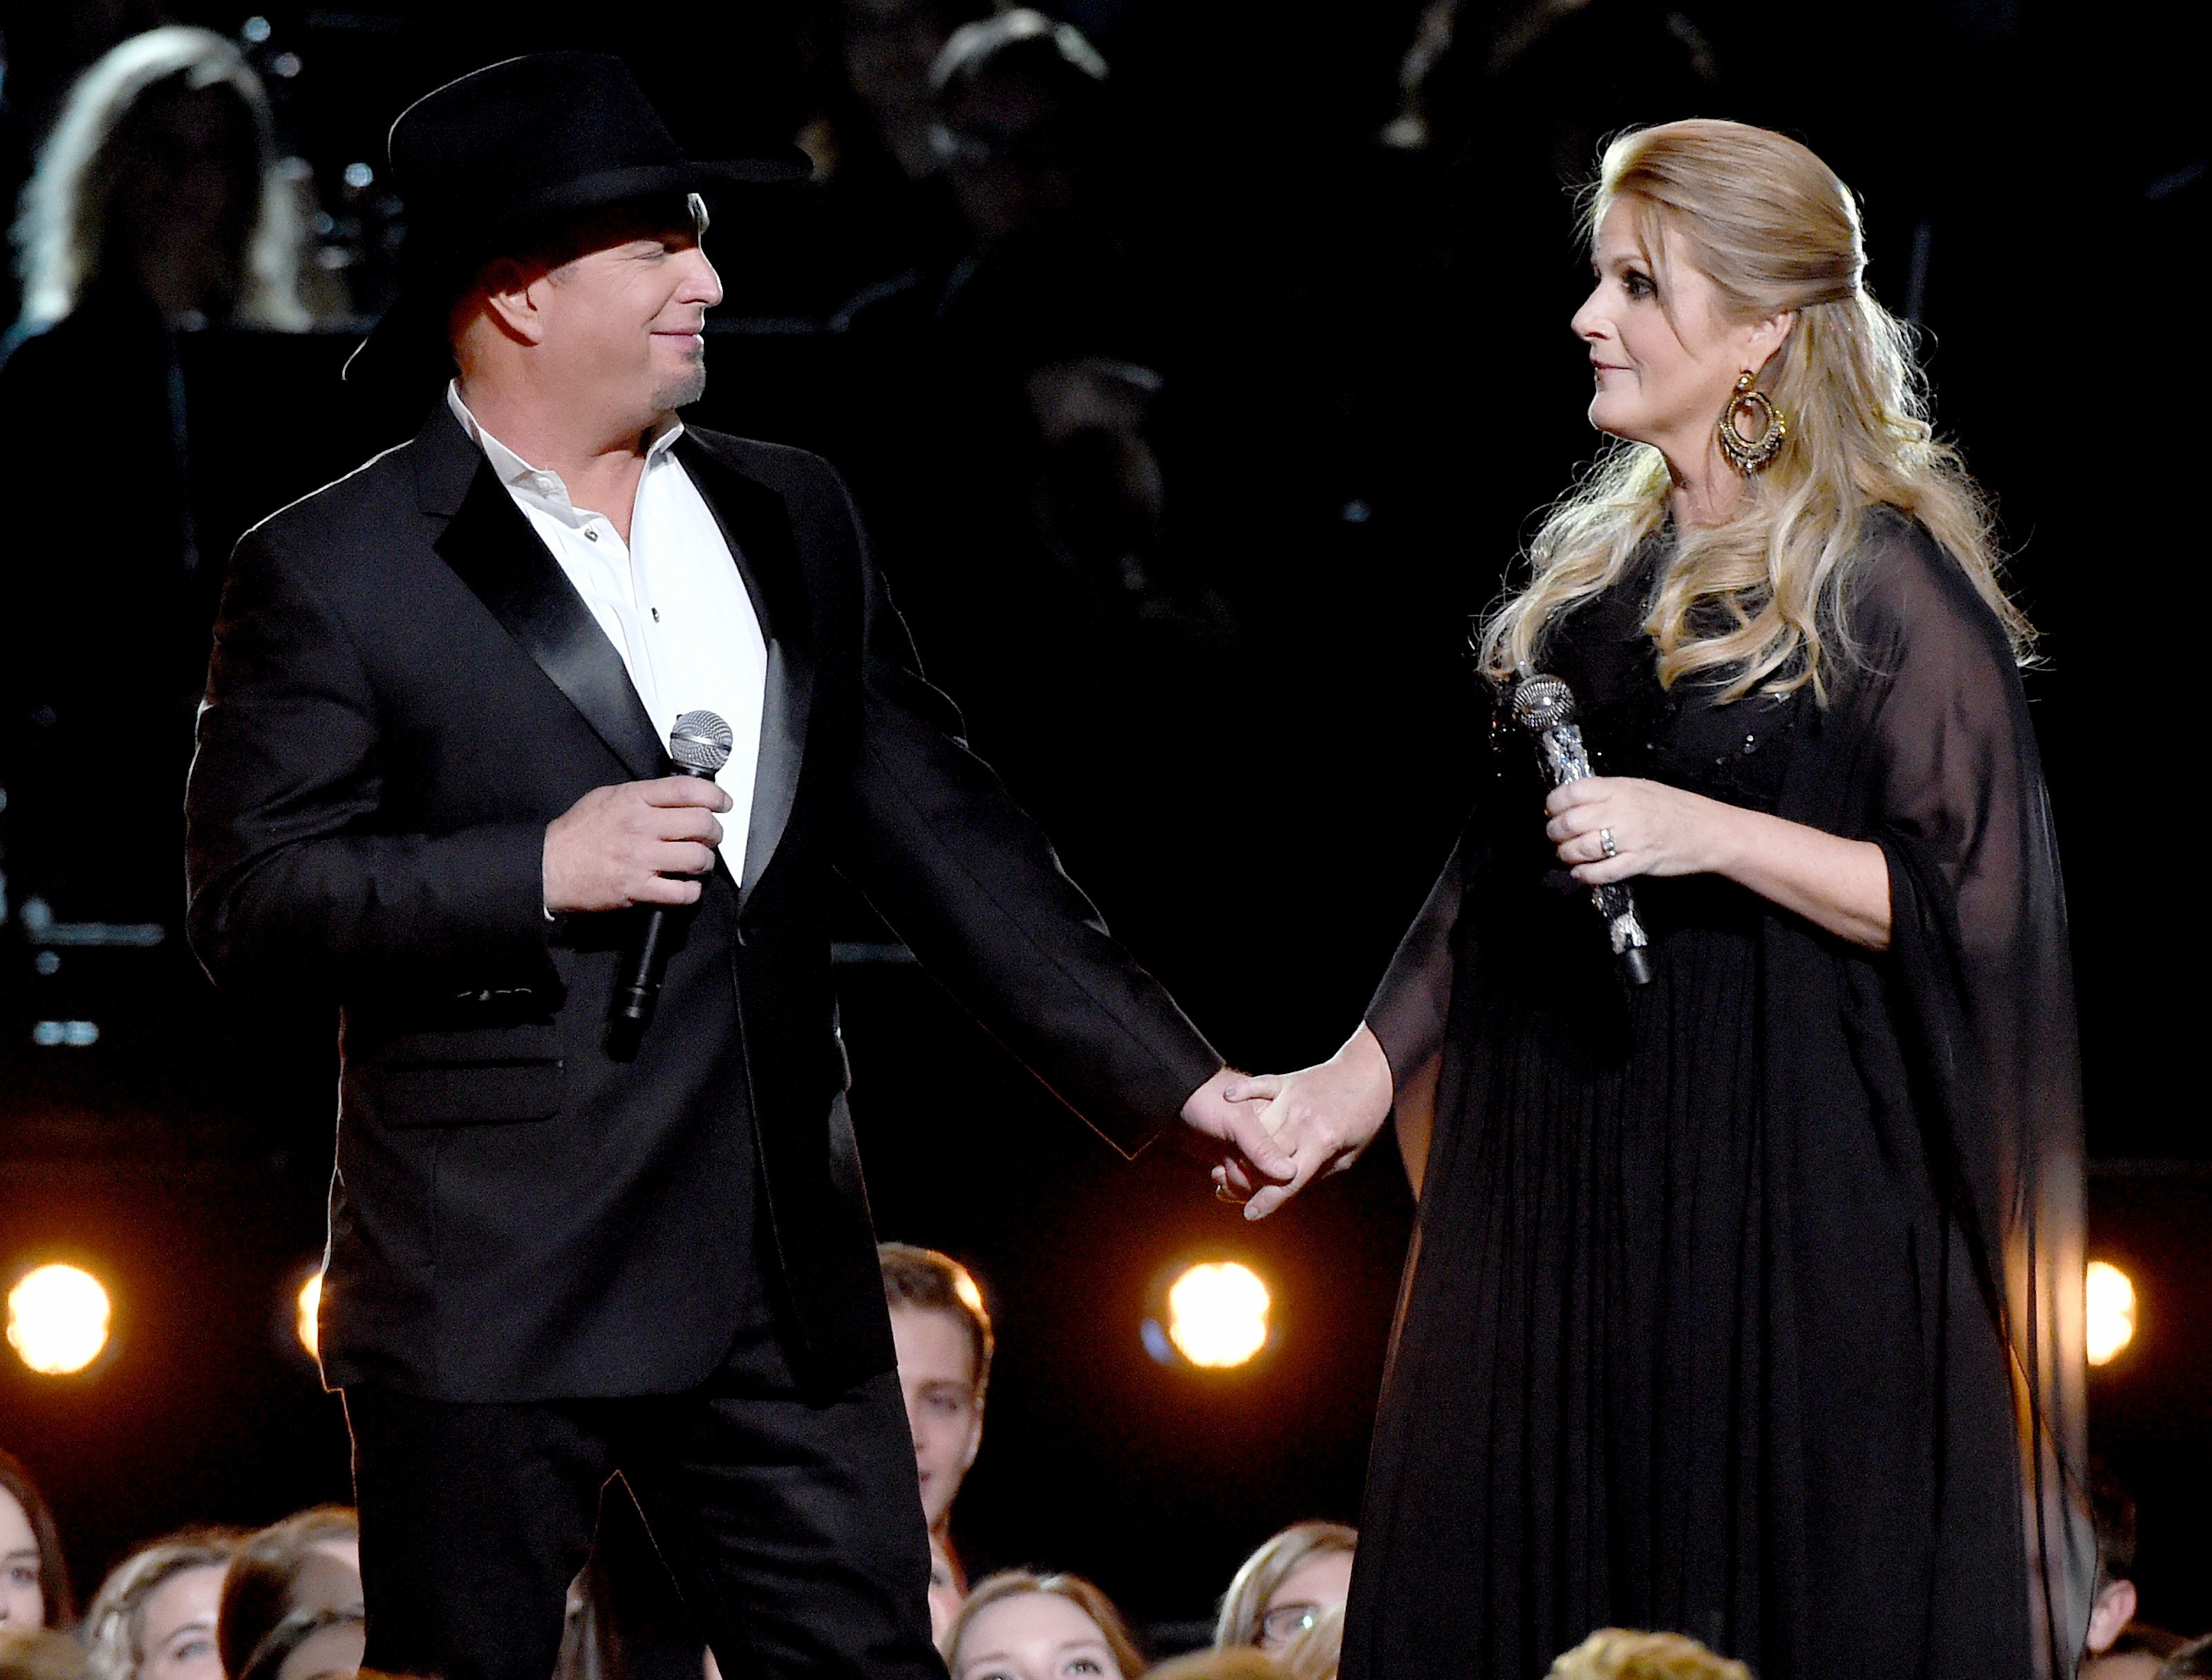 Garth Brooks and Trisha Yearwood perform onstage at the 50th annual CMA Awards at the Bridgestone Arena on November 2, 2016 in Nashville, Tennessee | Source: Getty Images